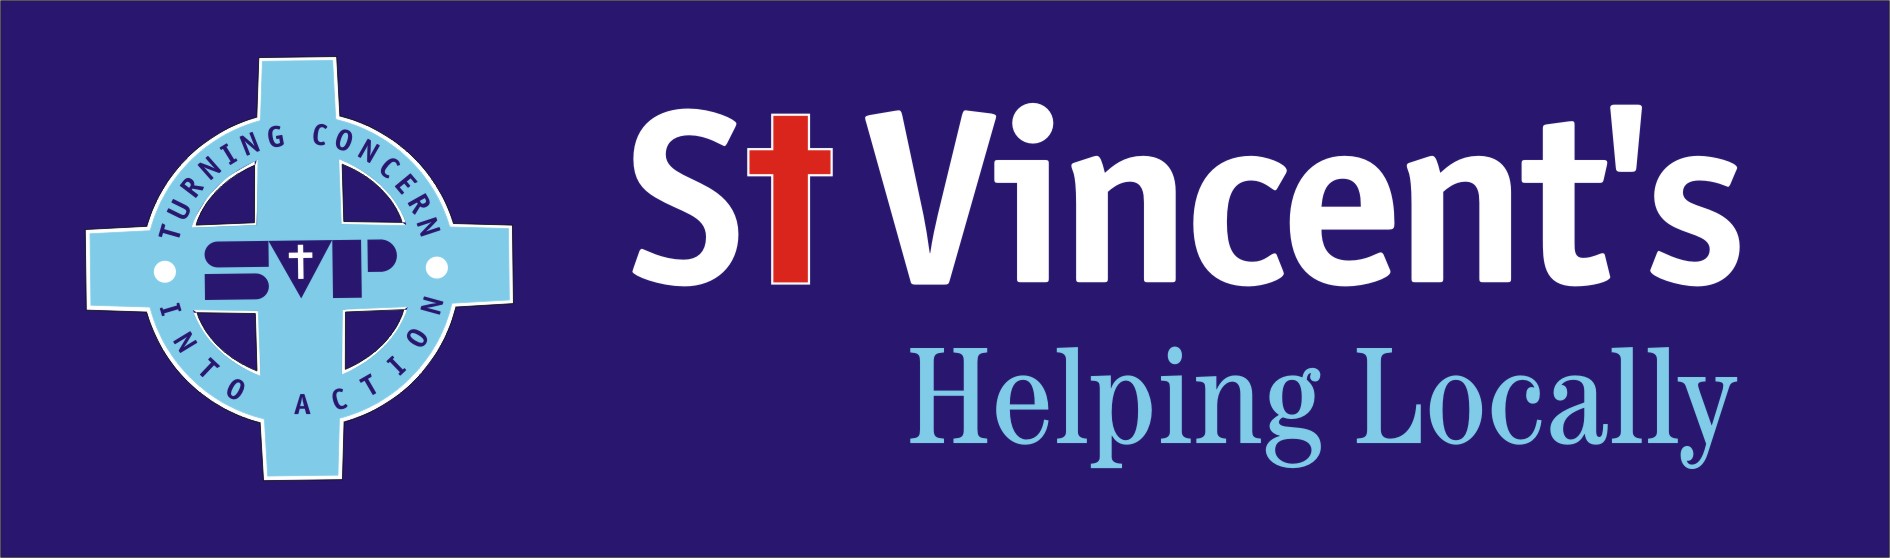 St Vincent's in West Yorkshire - Funders & Supporters